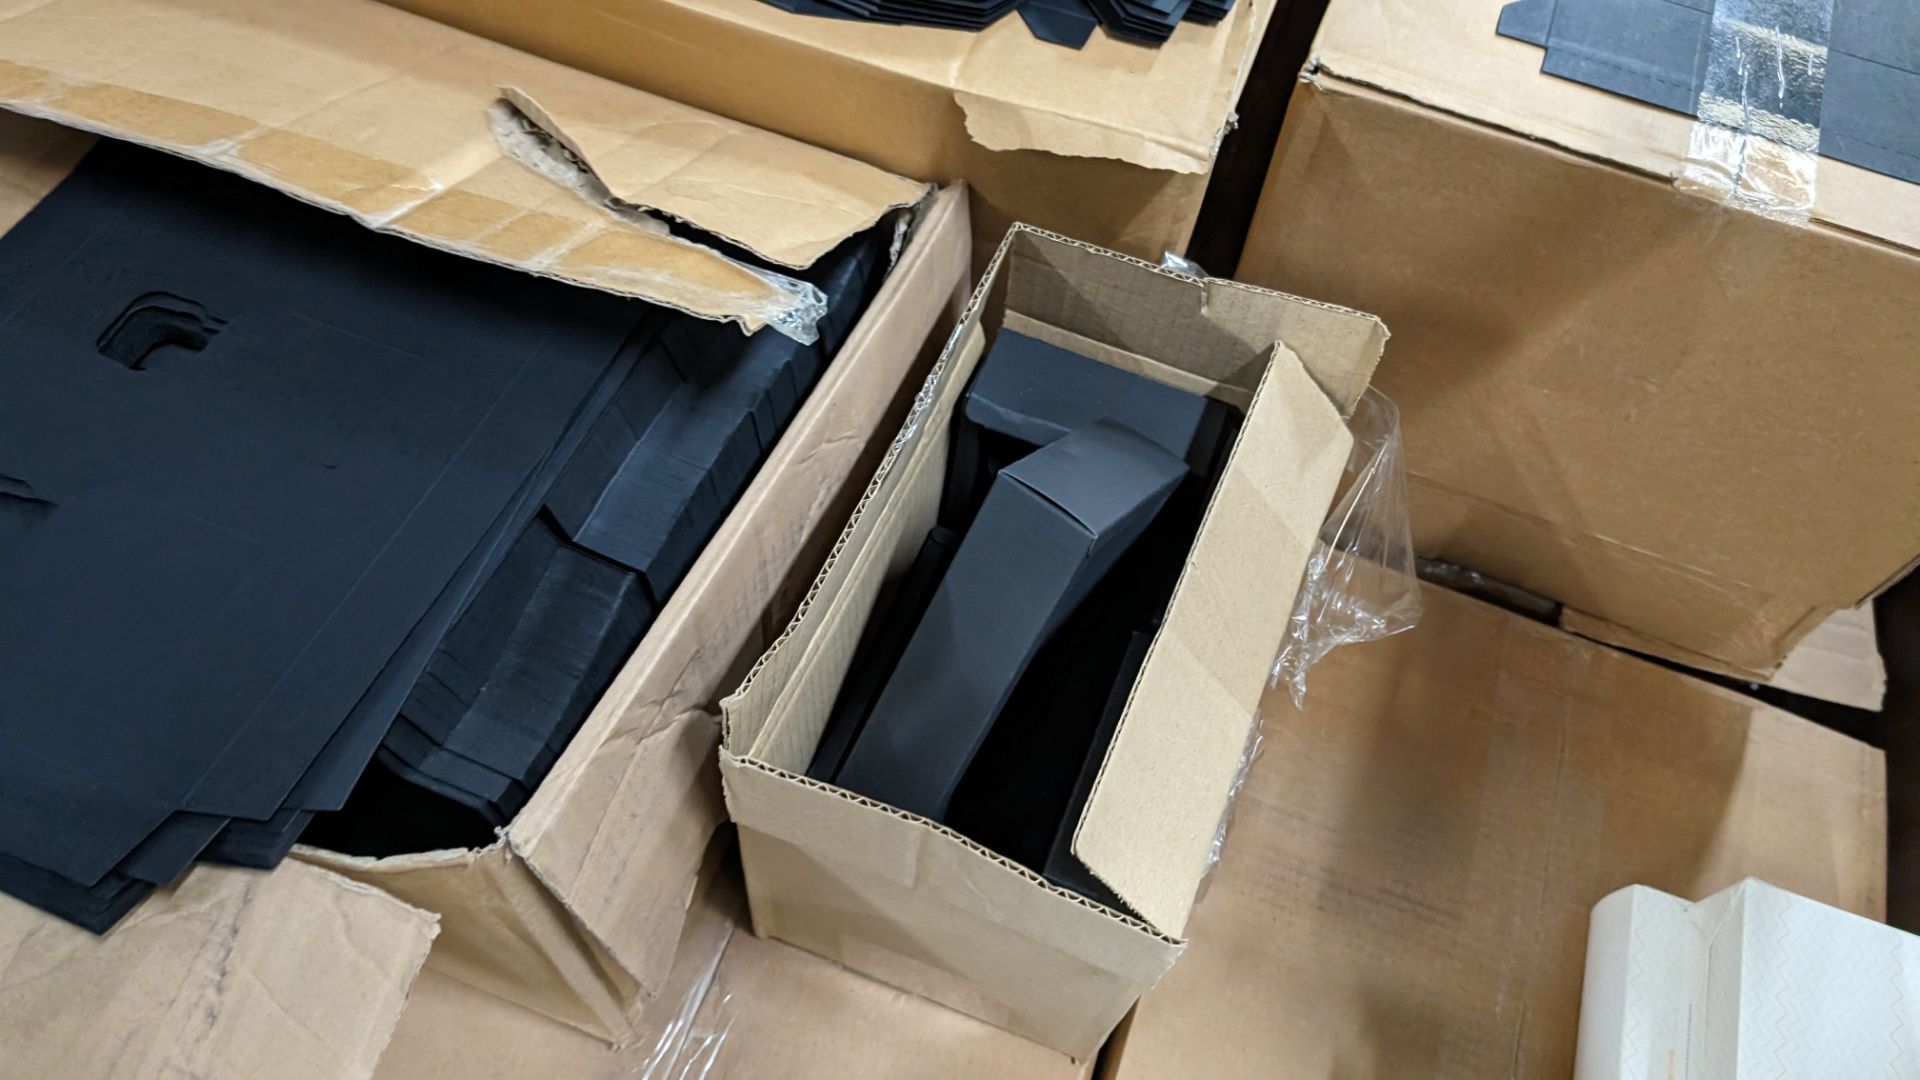 The contents of a pallet of assorted packaging materials primarily comprising flatpack black boxes b - Image 5 of 12